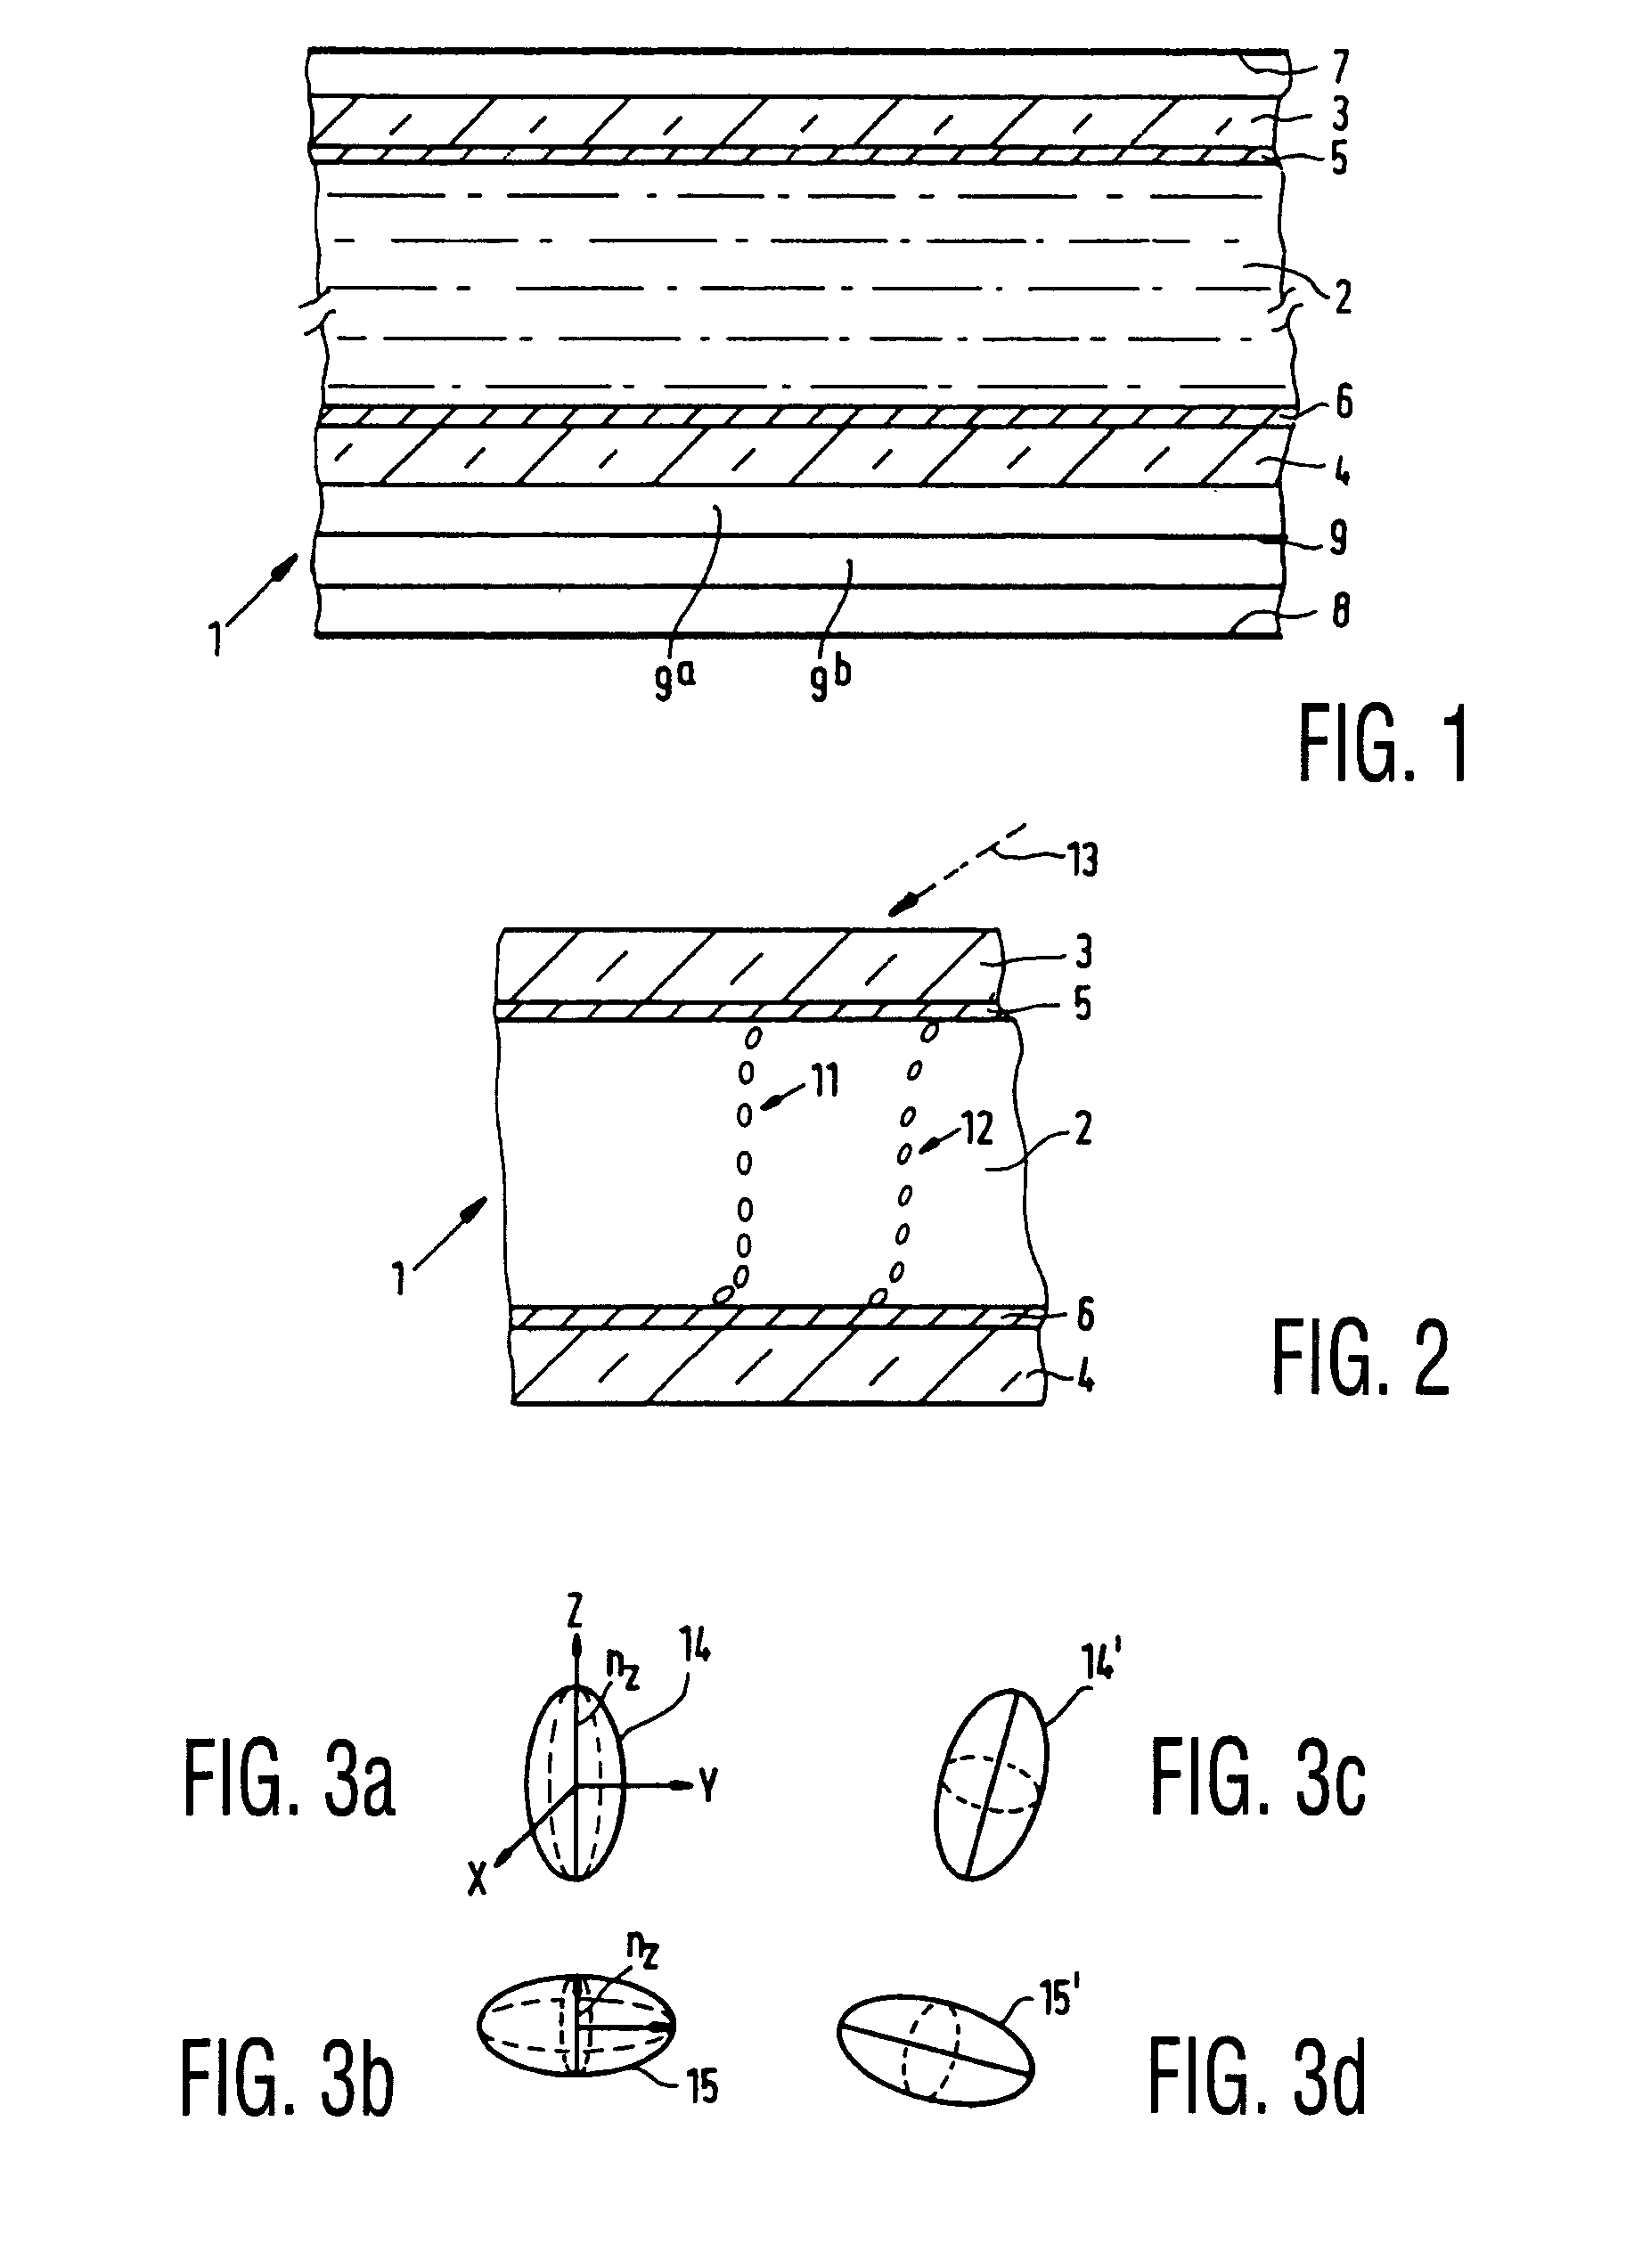 Method of manufacturing a compensator layer with retardation foils exhibiting tilt angles parallel to planes normal to the foils and angled with respect to one another